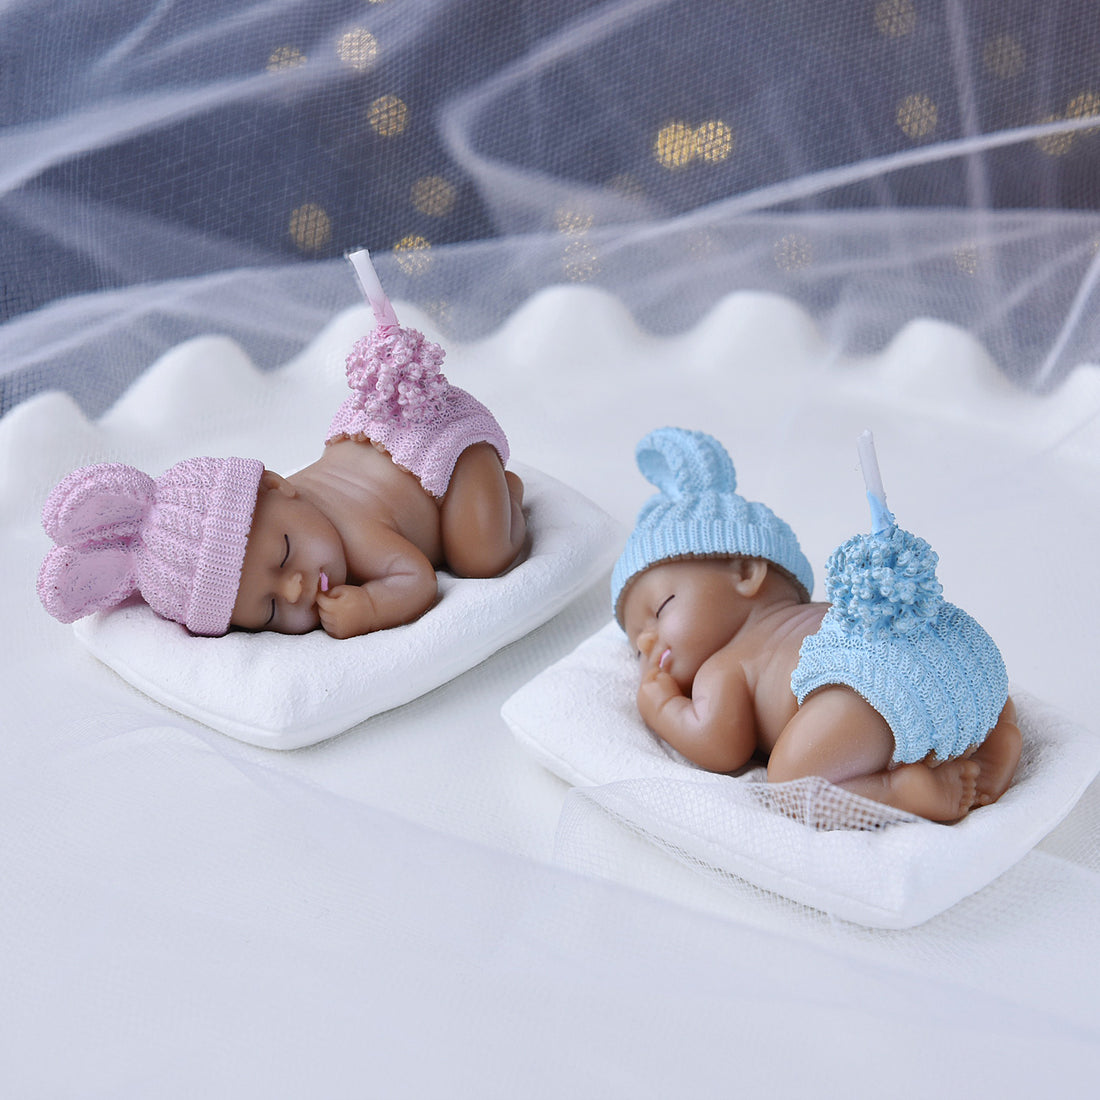 These Sleeping Baby Candles that melts the darkness.